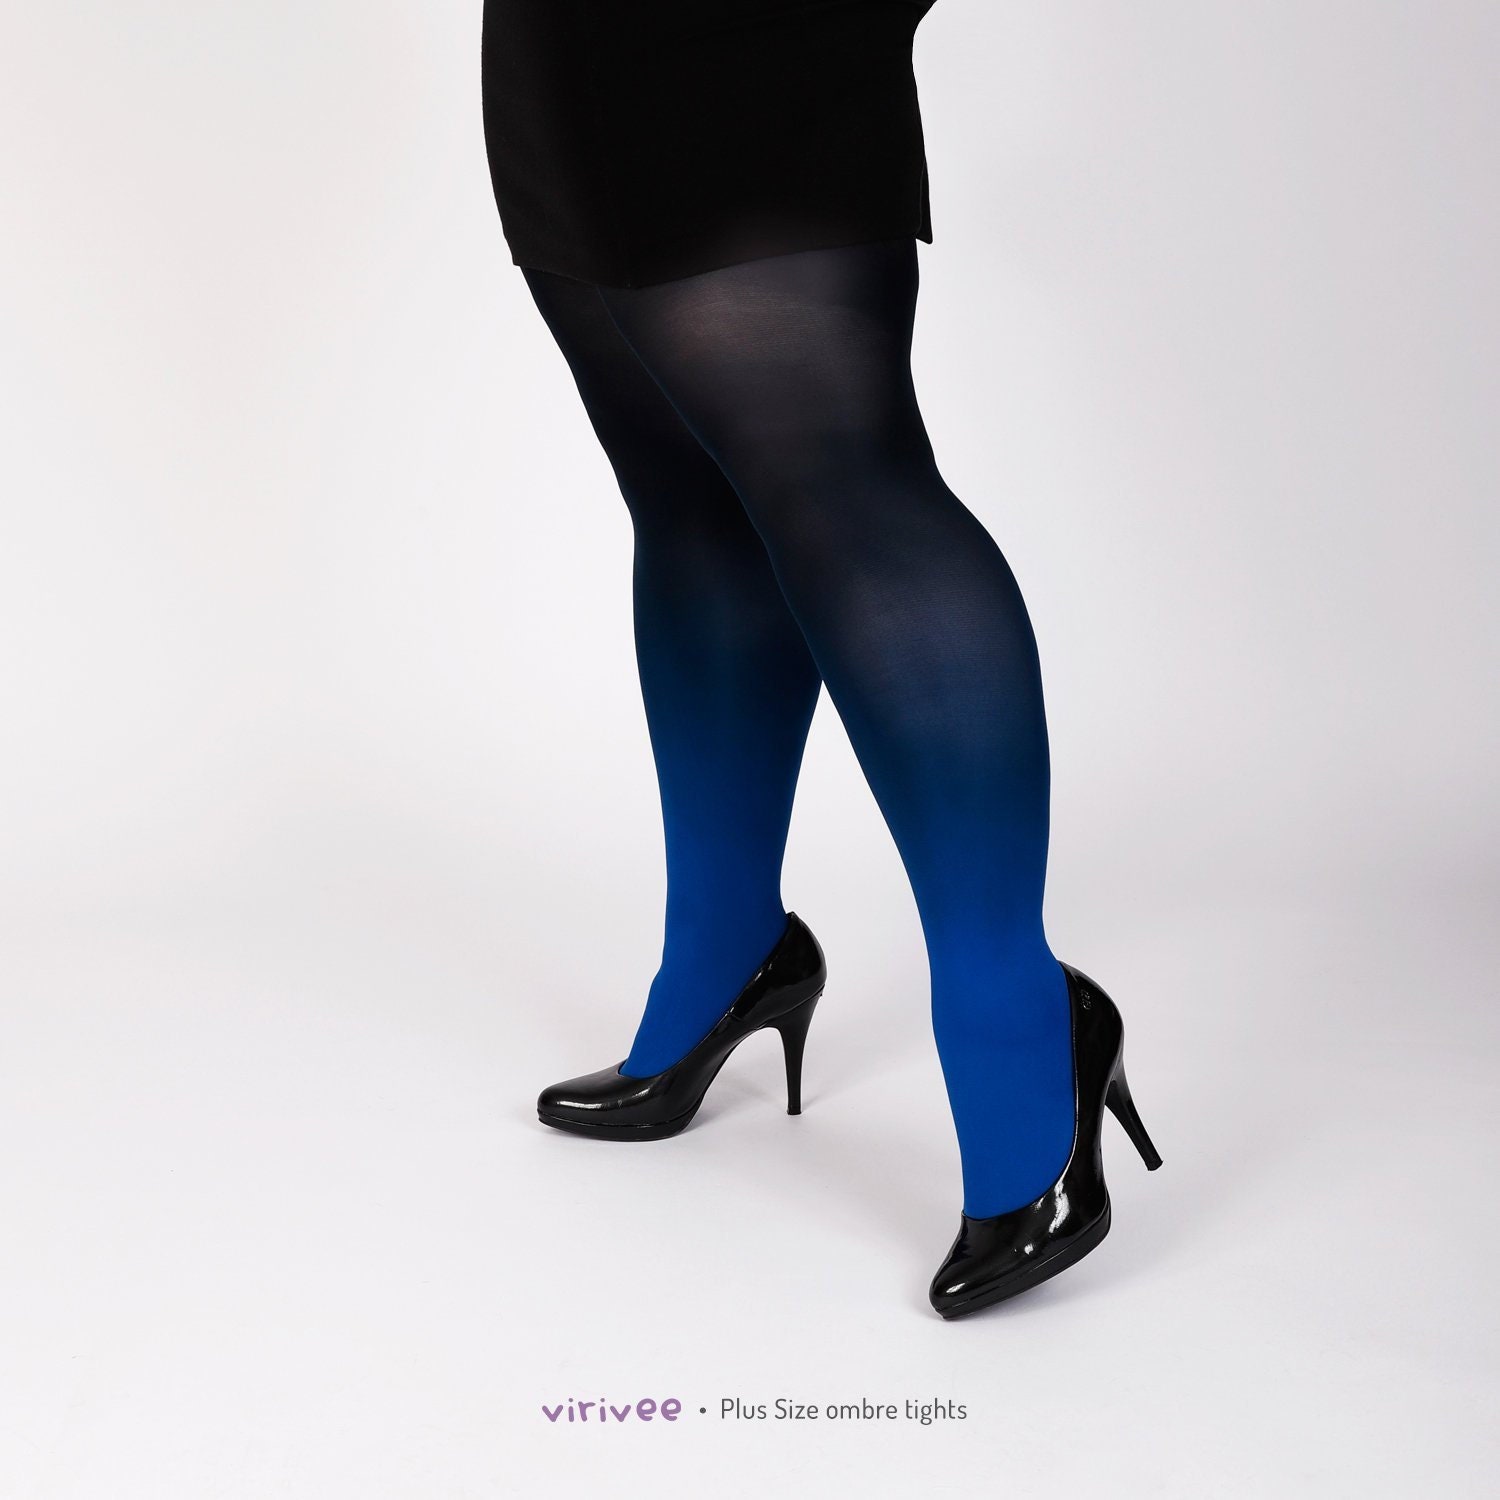 Plus Size Tights for Women Blue-black, Ombre SEMI-OPAQUE Pantyhose, Gift  Under 35 